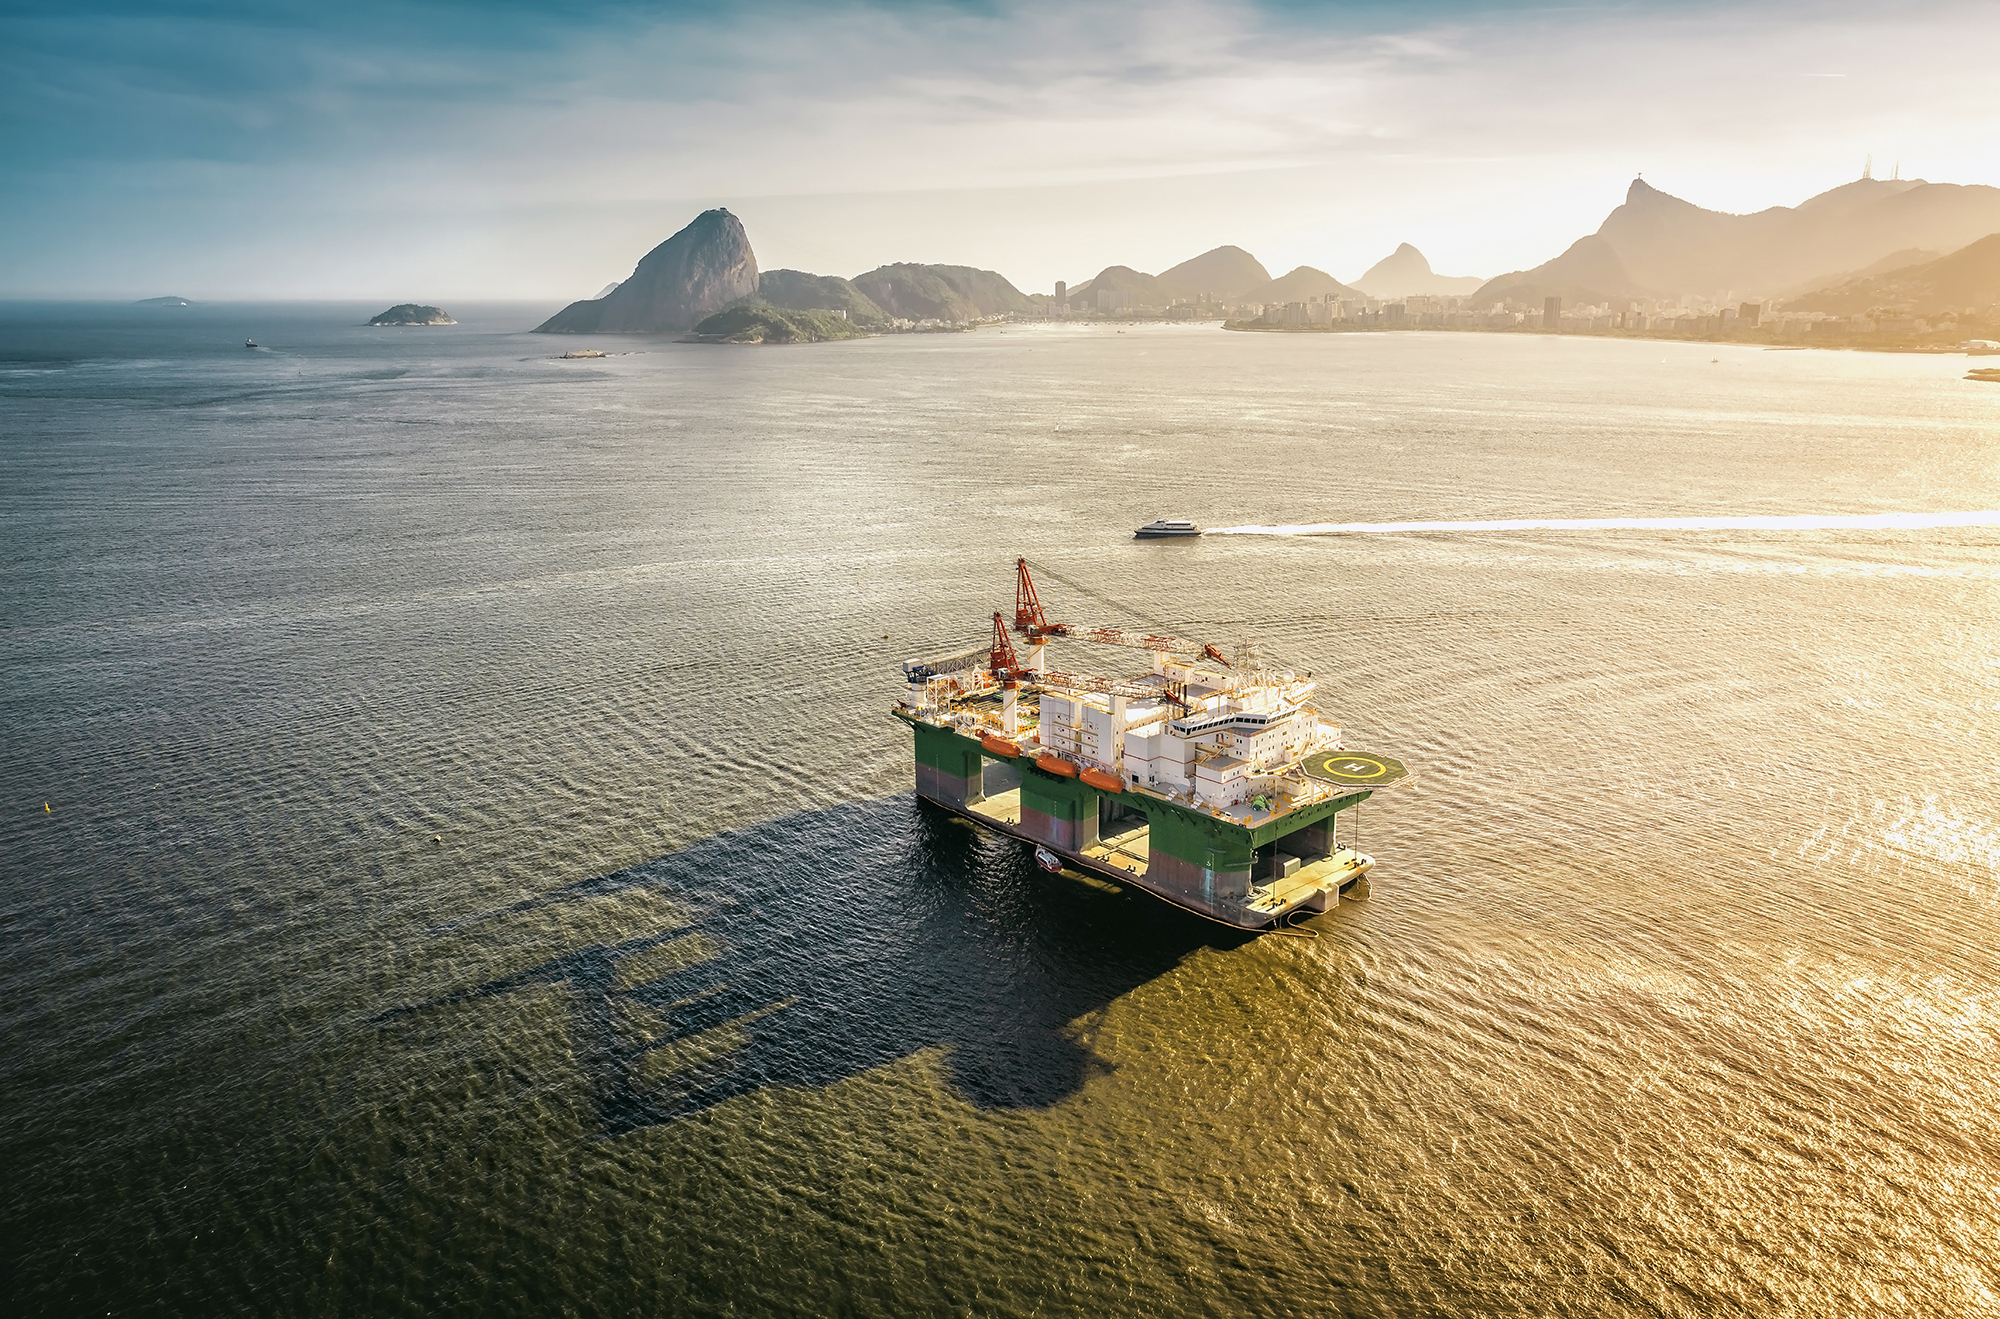 Brazilian oil and gas have been the primary beneficiaries of Chinese investment in the country